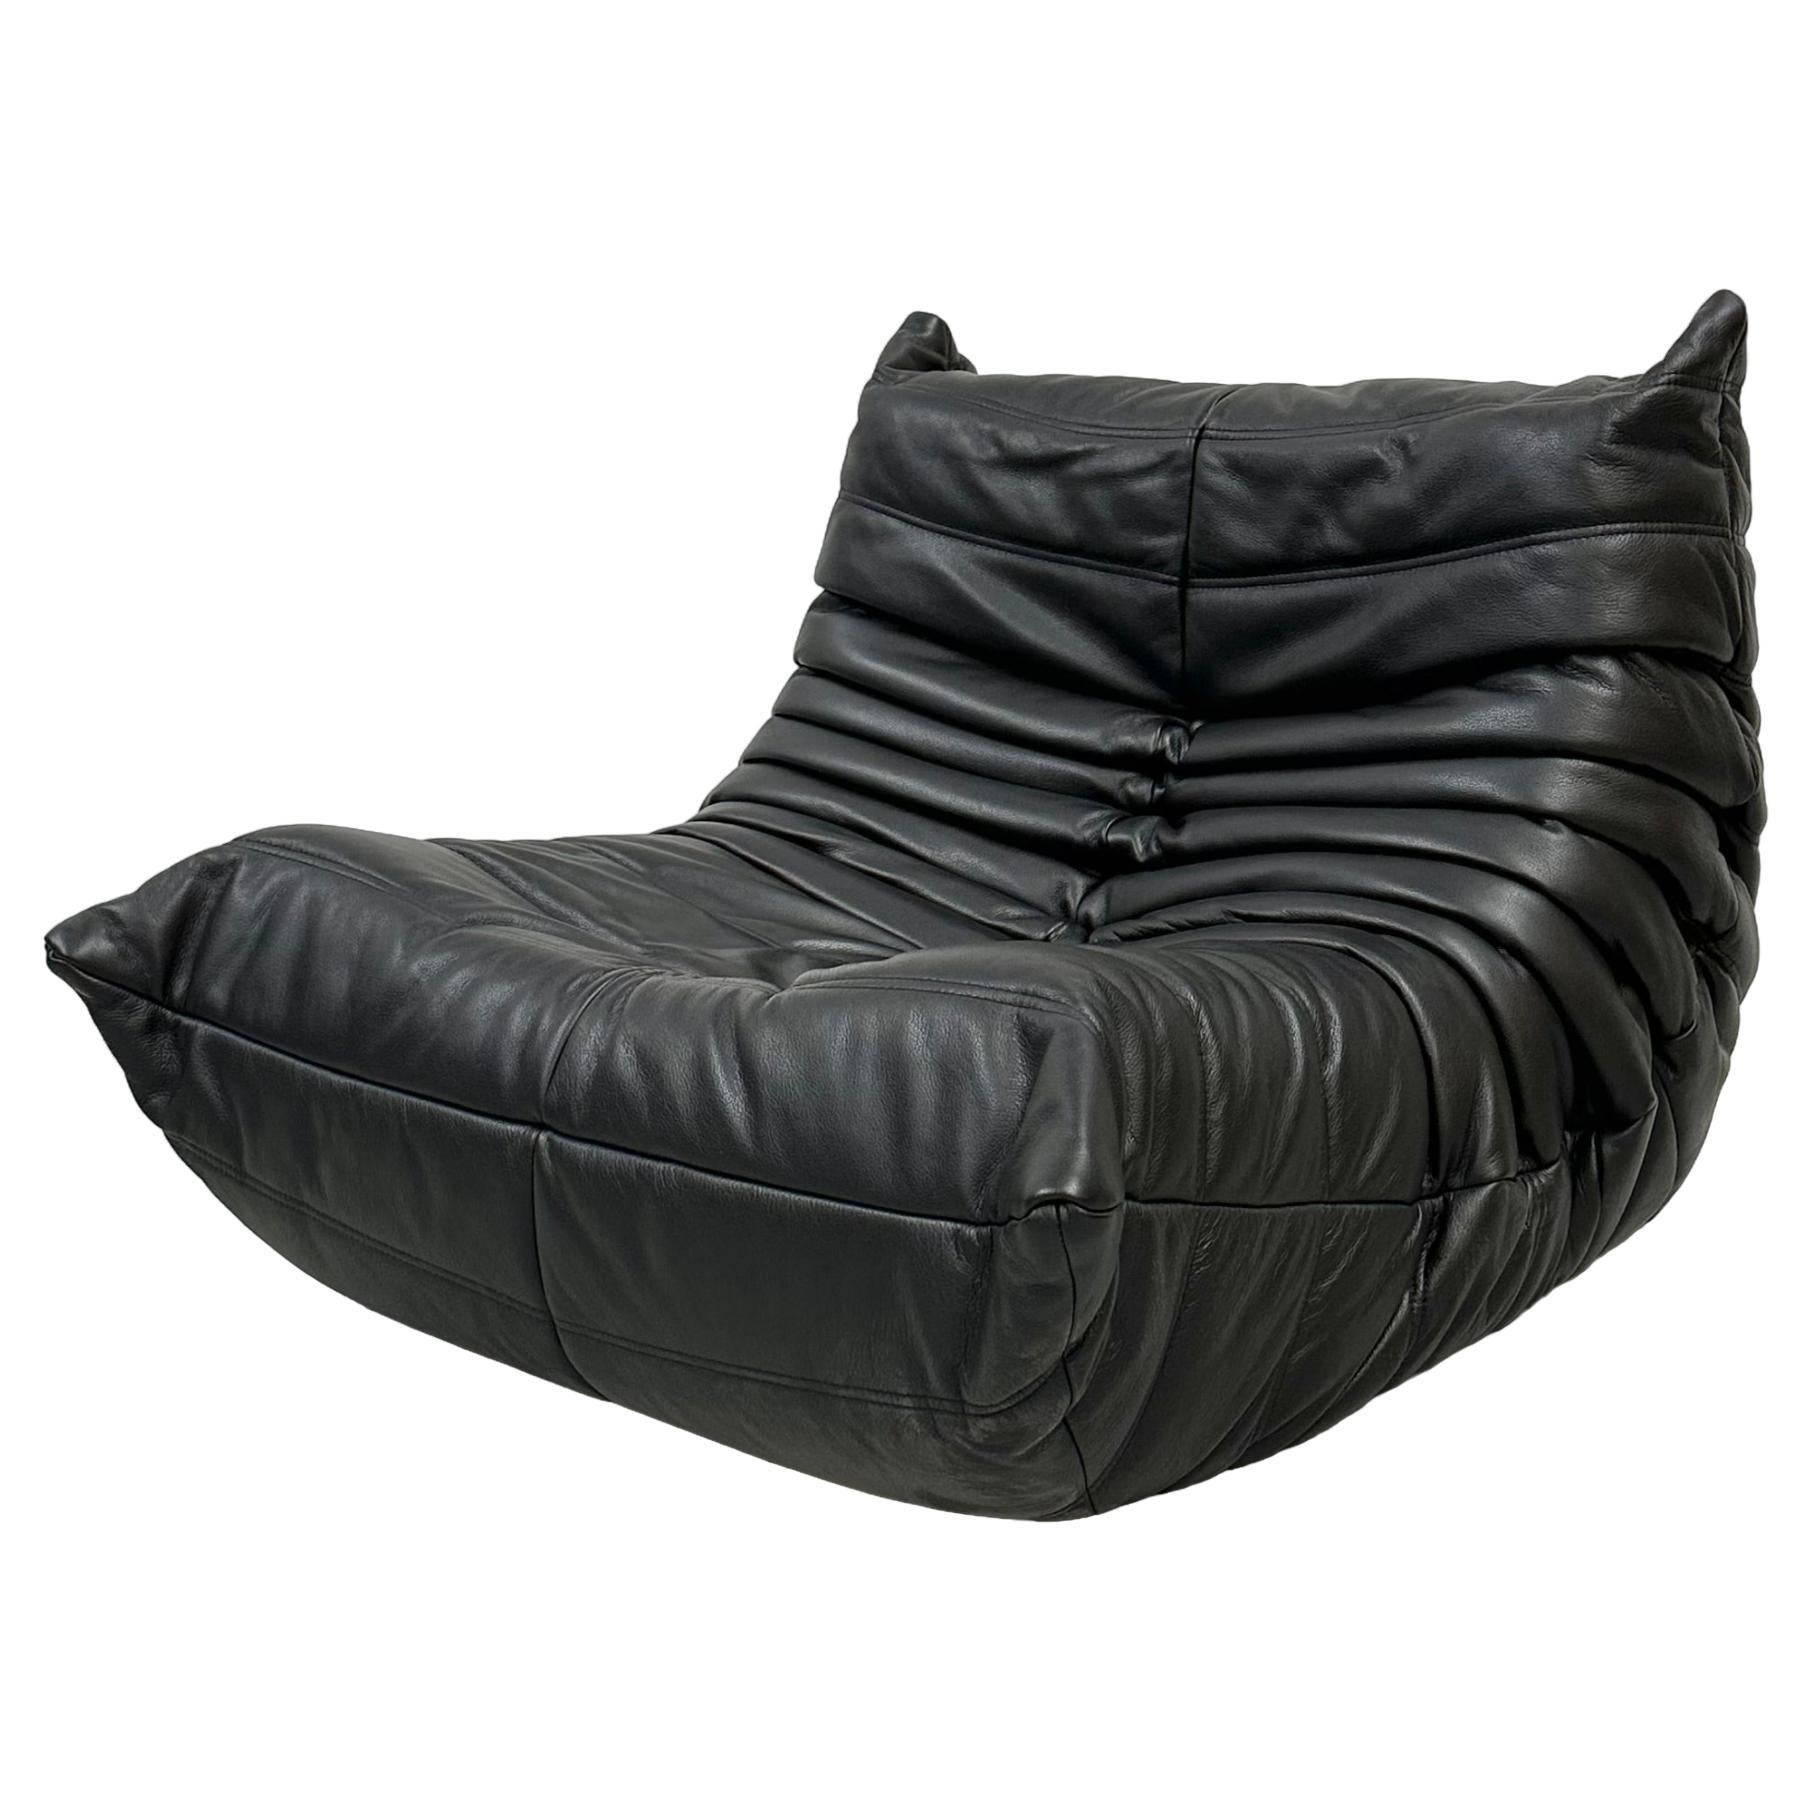 French Vintage Togo Chair in Black Leather by Michel Ducaroy for Ligne Roset.